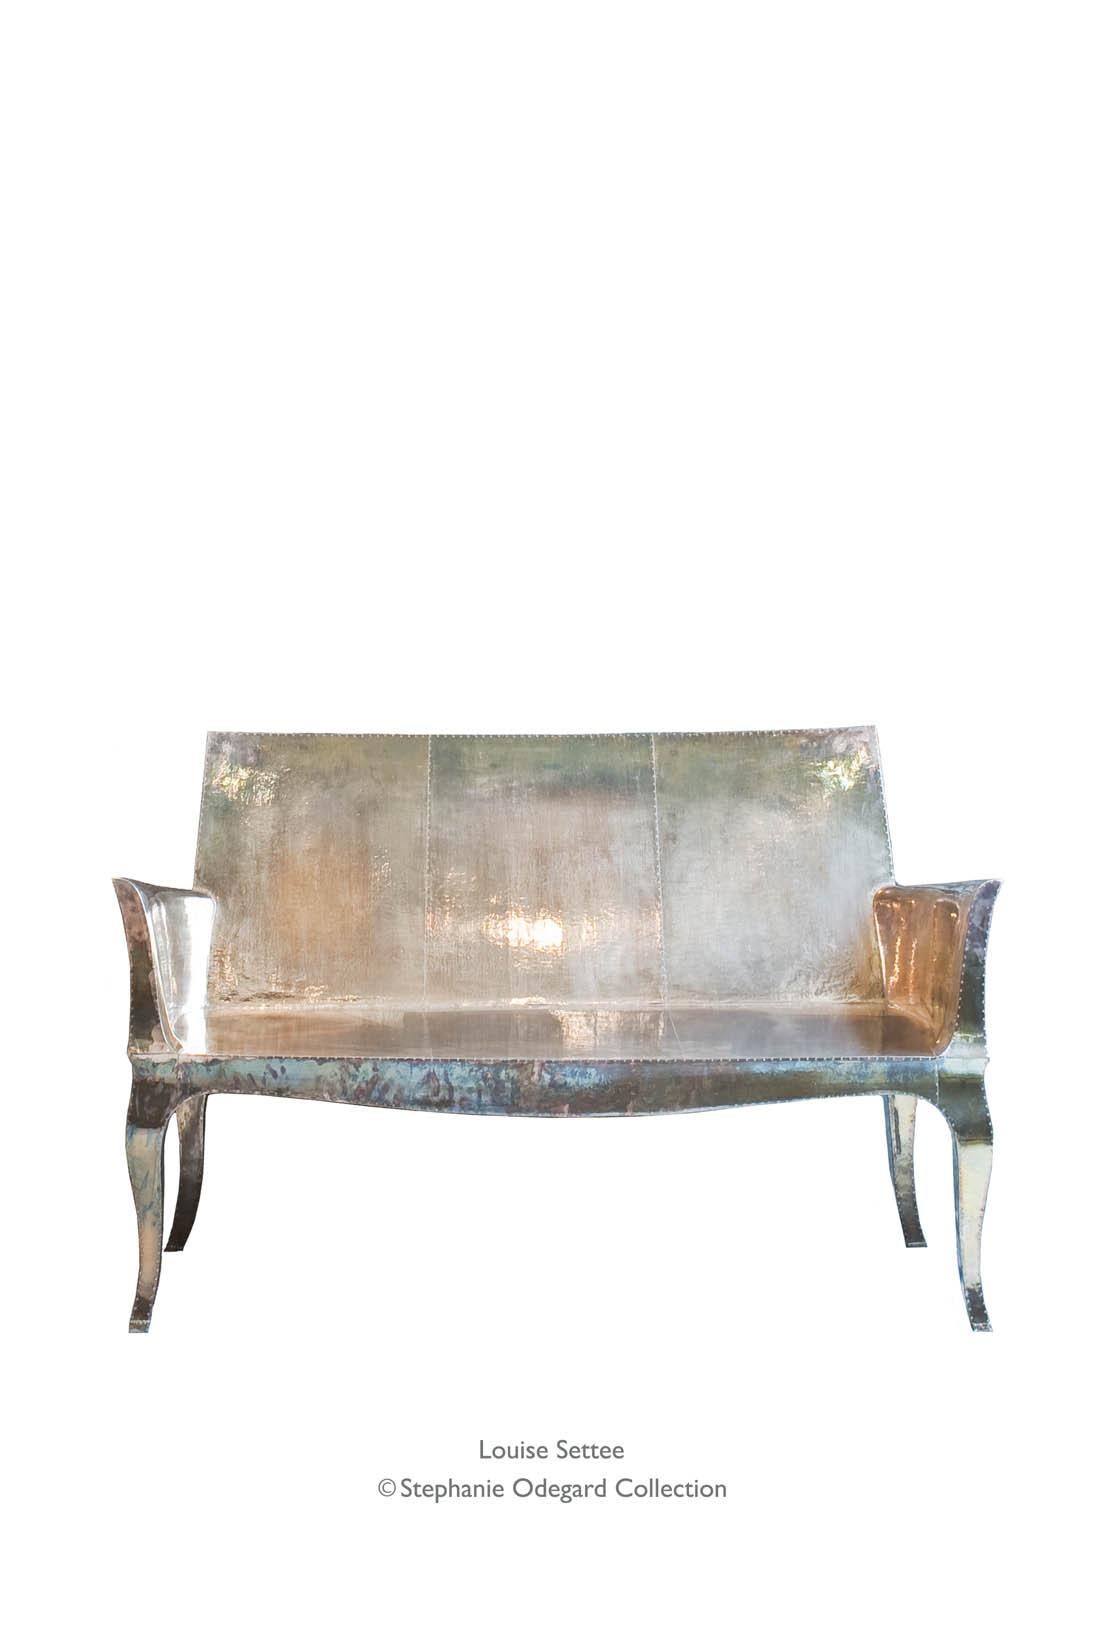 Louise Settee Art Deco Benches in Mid. Hammered Antique Bronze by Paul Mathieu For Sale 6